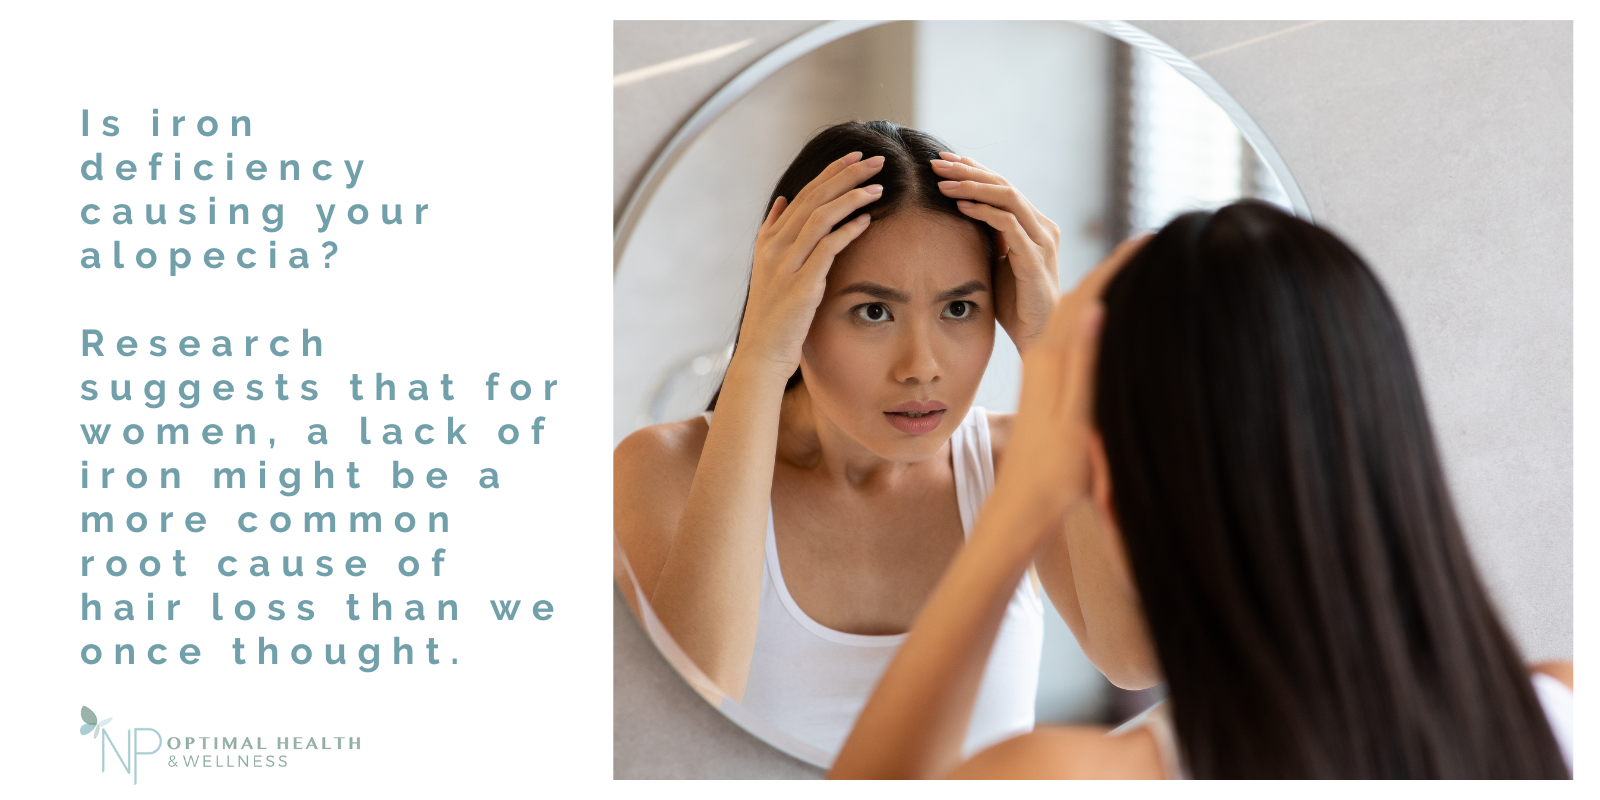 Women looking in the mirror at hair loss caused by iron deficiency. Captions reads: Is iron deficiency causing your alopcia?